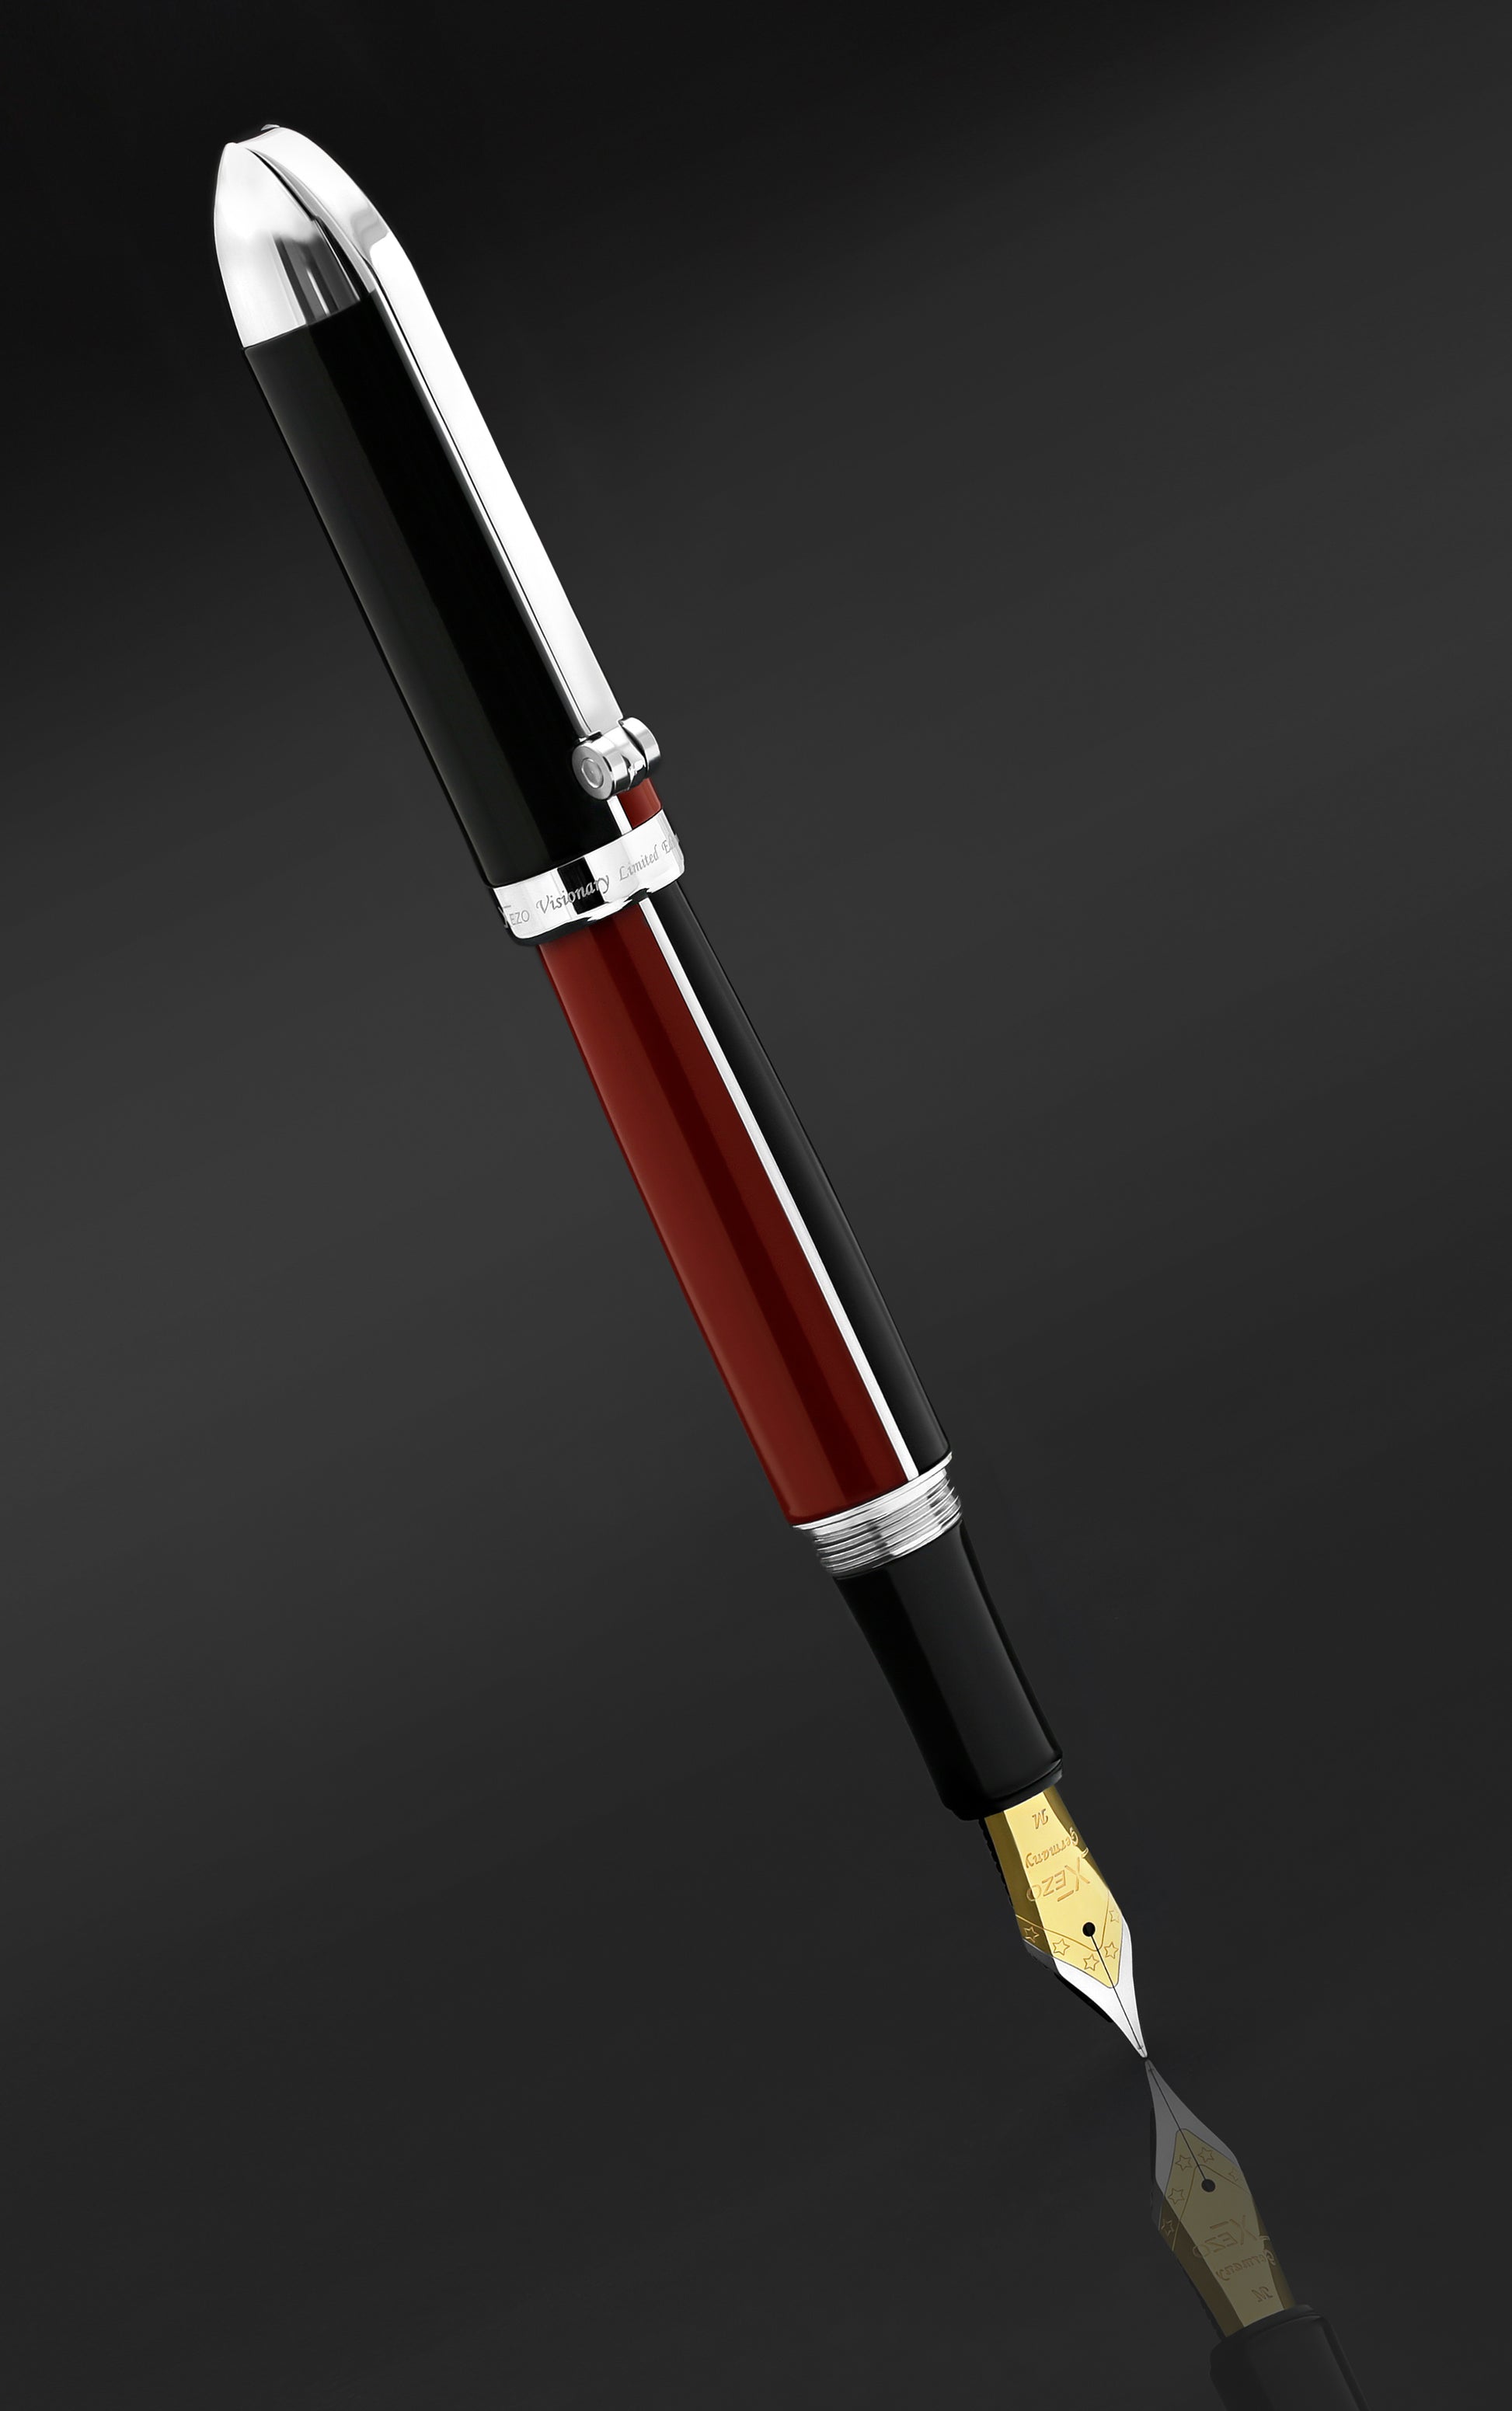 Xezo - Angled view of the side of the Visionary Red/Black FM fountain pen and the reflection of its tip on the surface